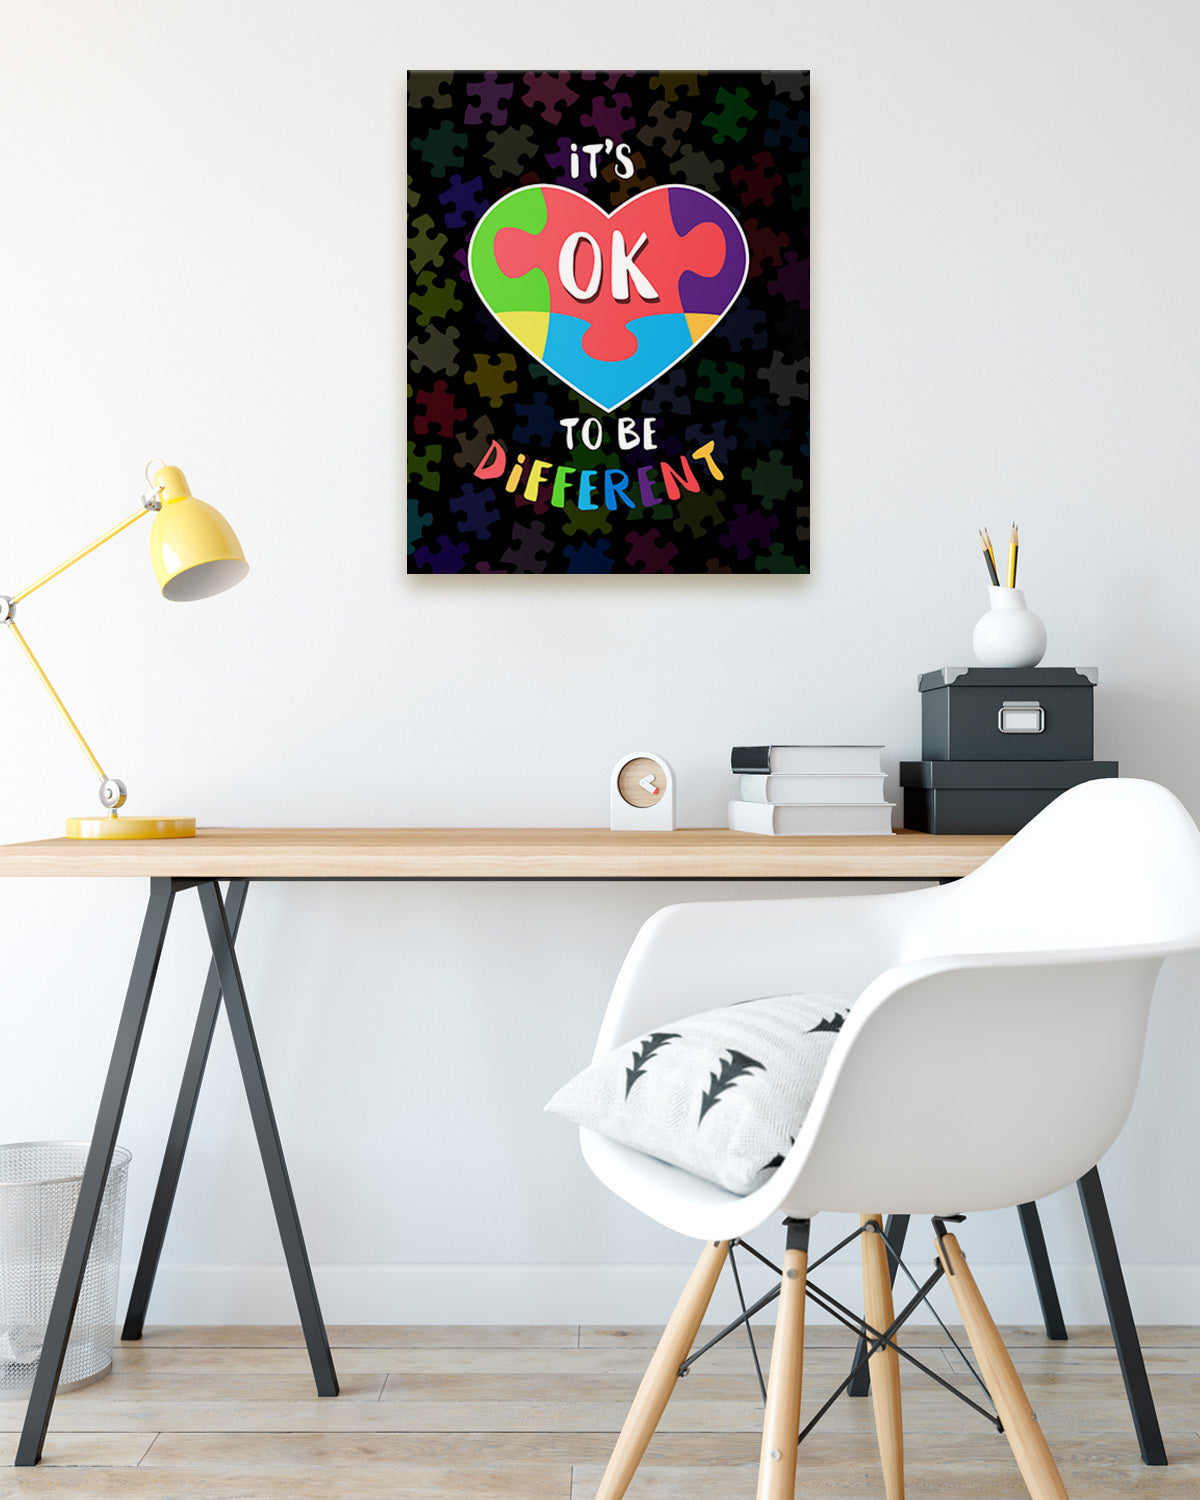 It's Ok To Be Different Autism Awareness Decor - Autism Art Wall Decor Classroom